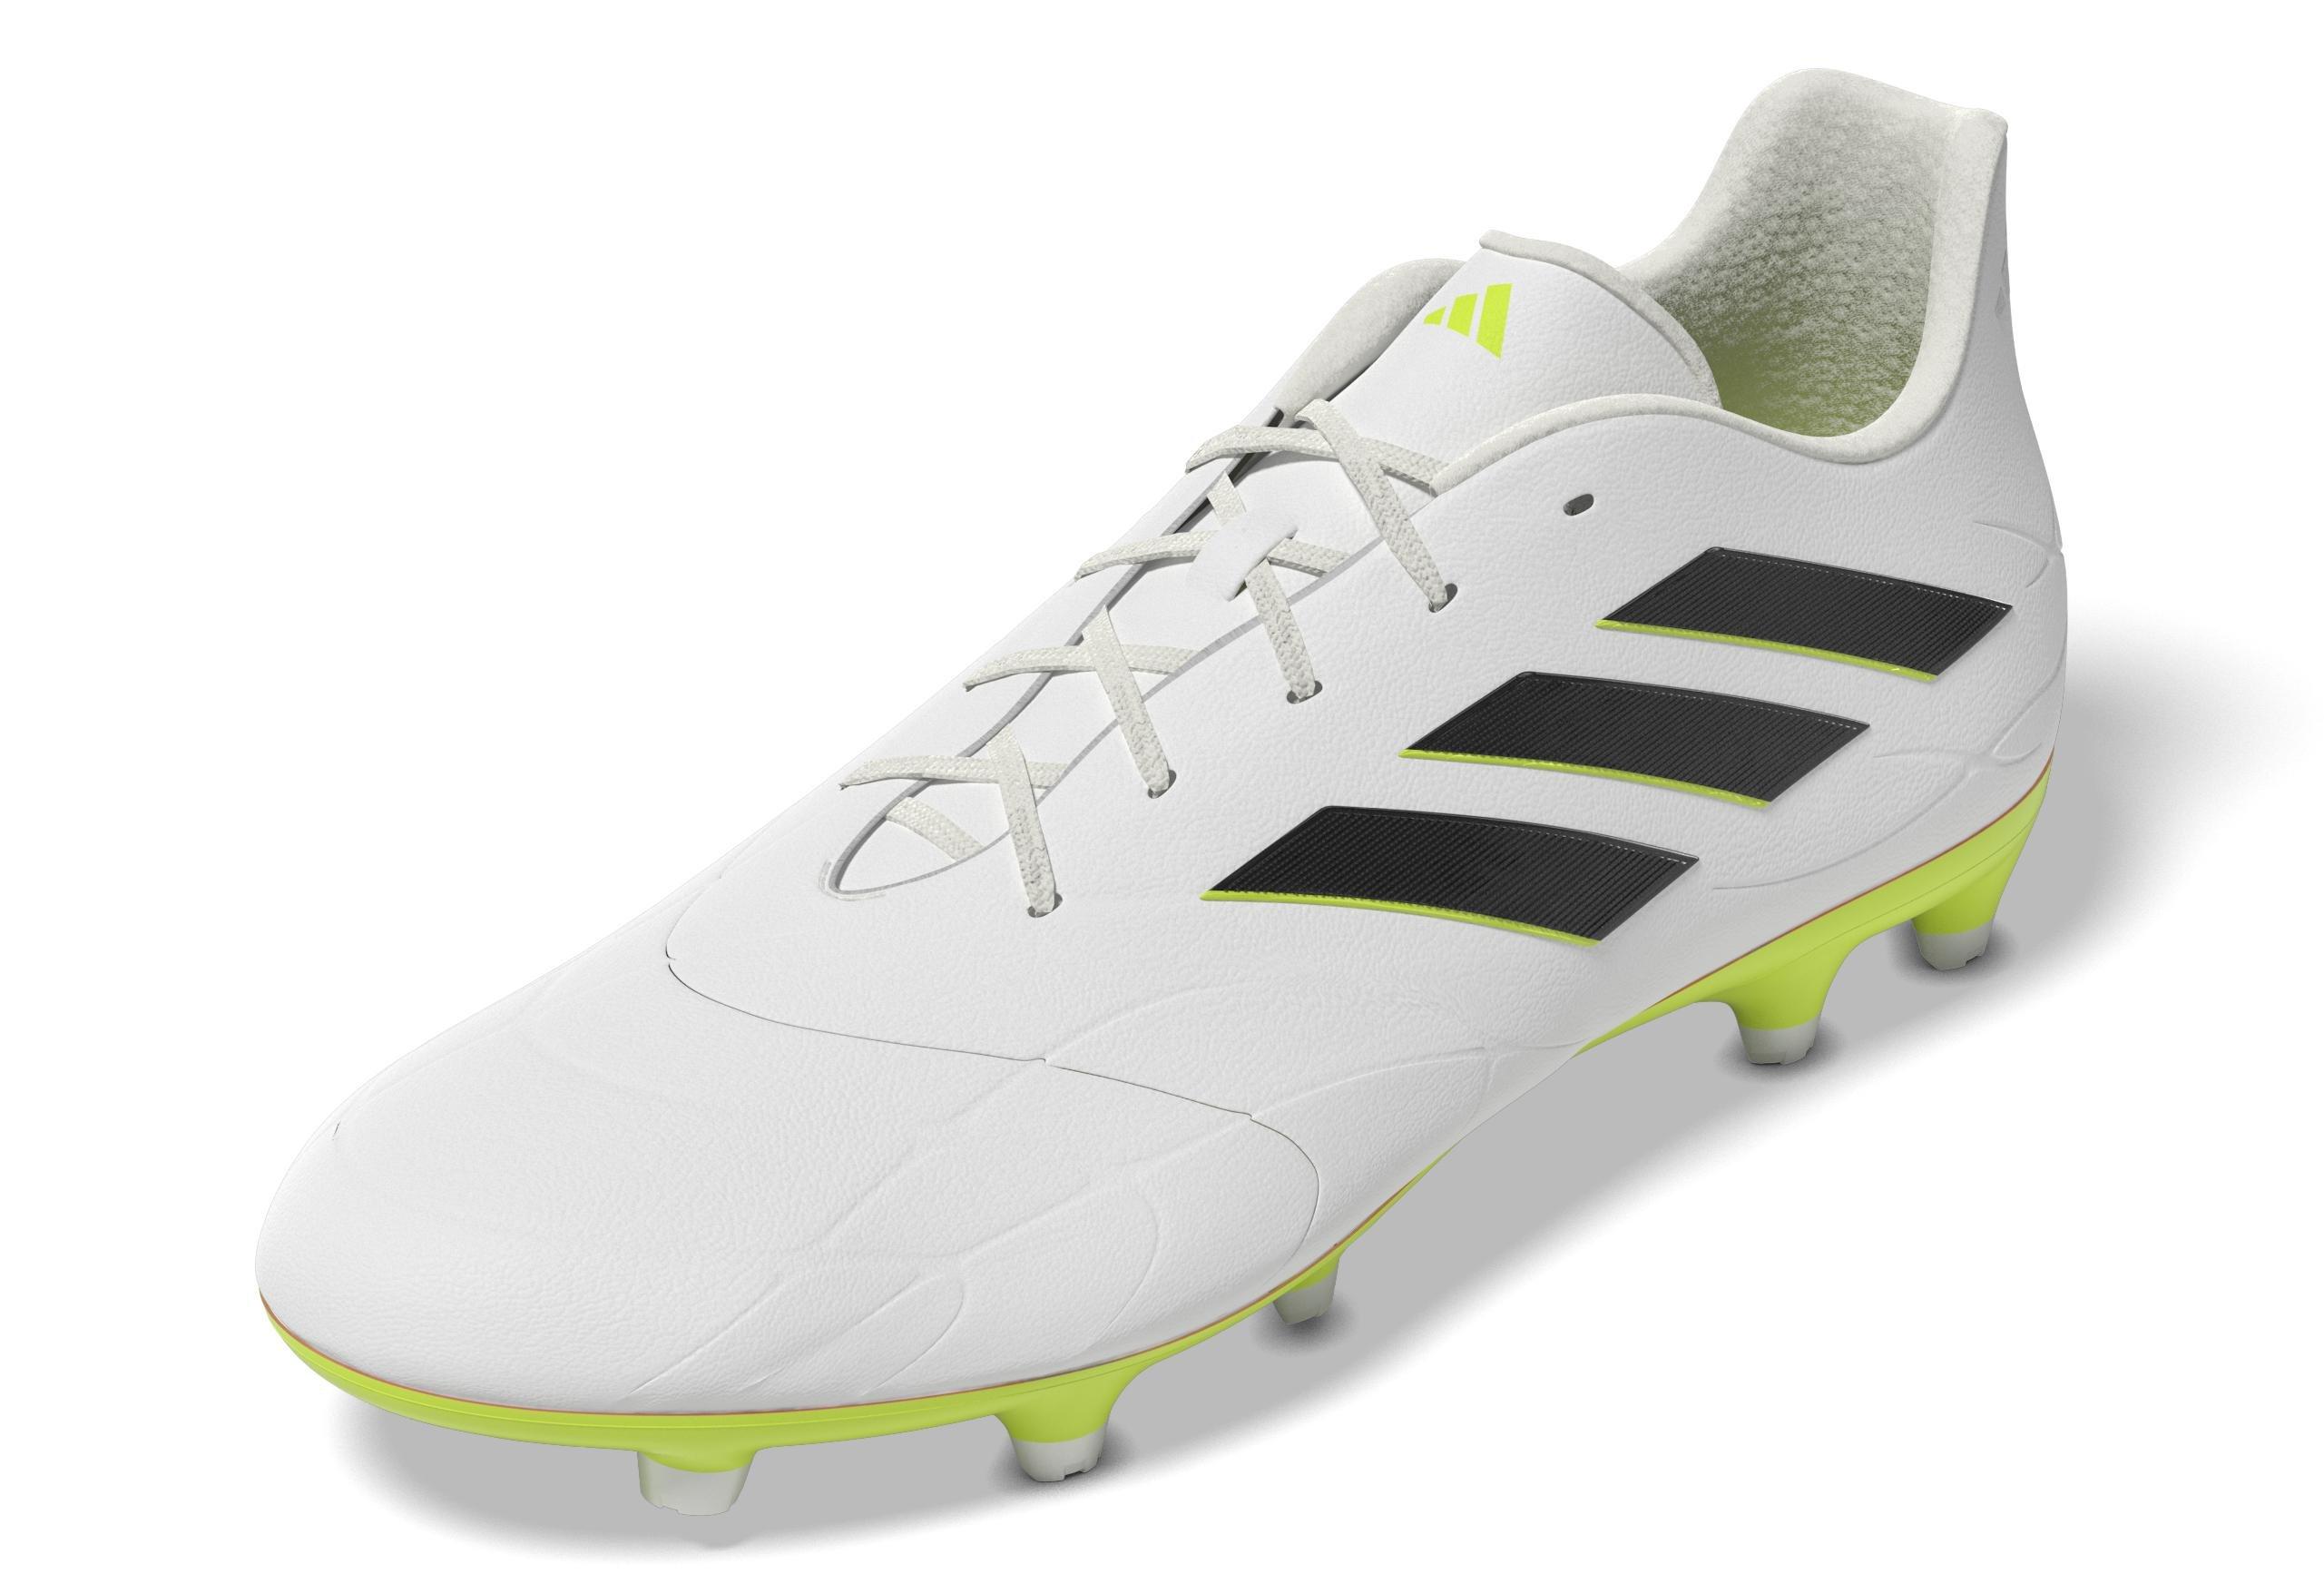 COPA PURE.3 FG, A901_ONE, large image number 5